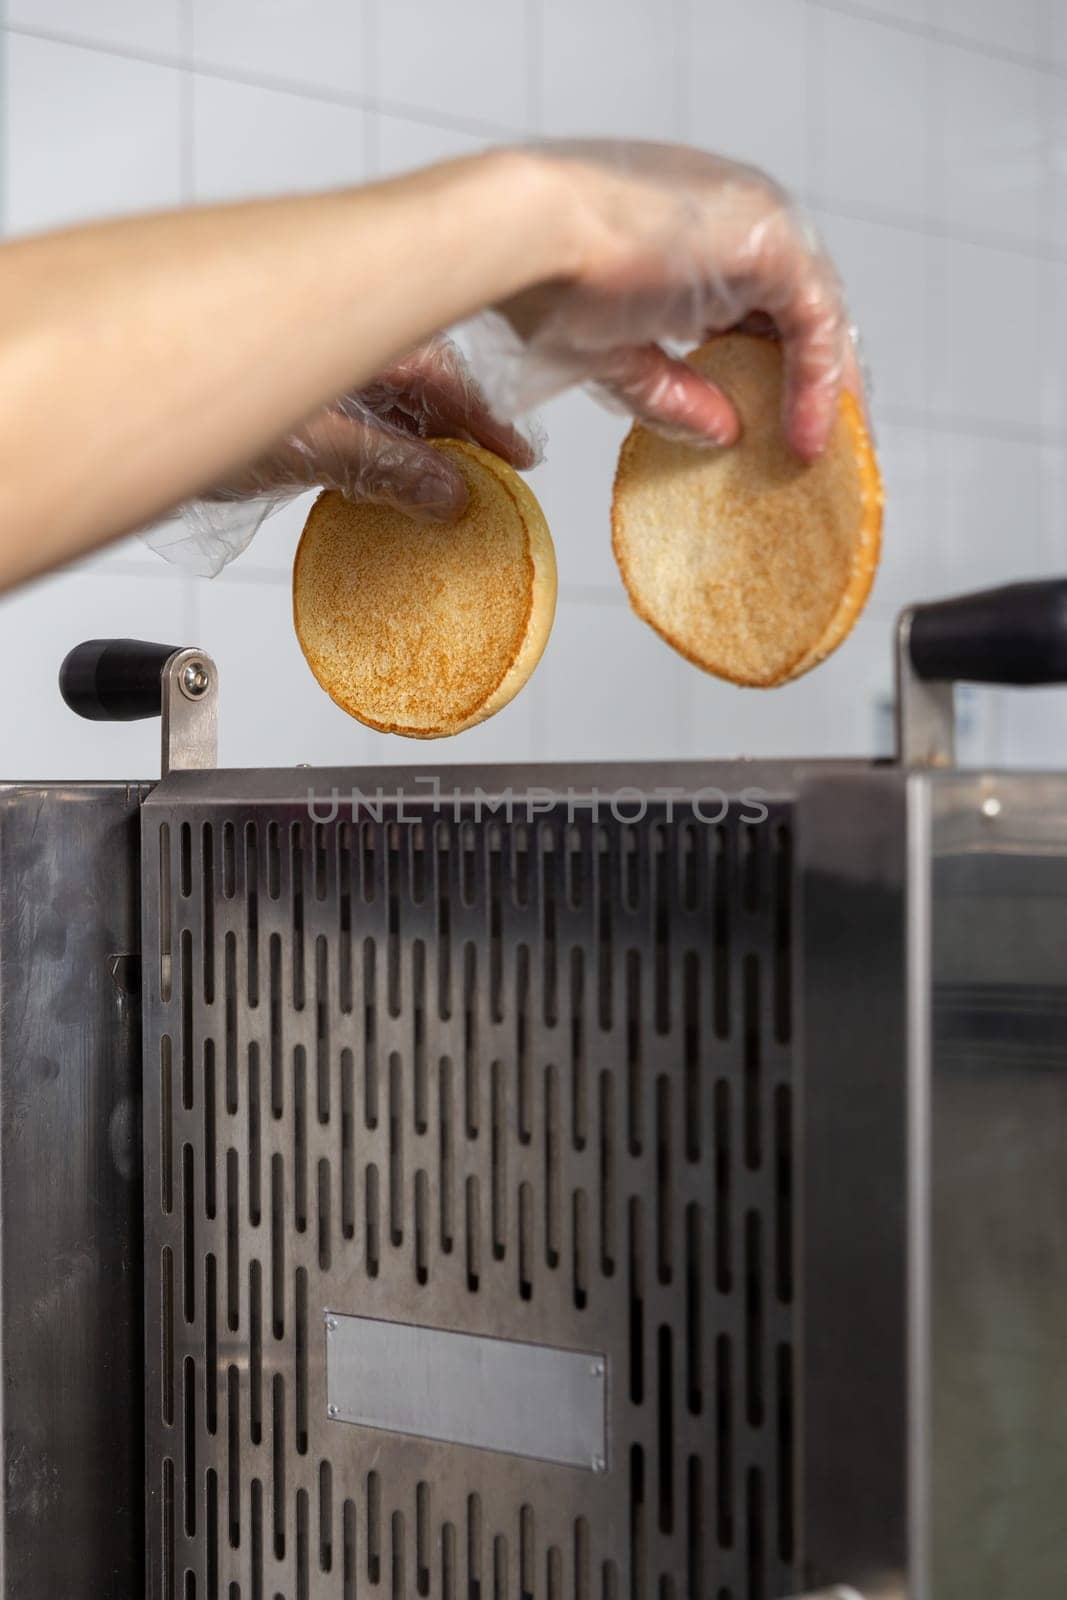 Conveyor toaster for frying burger buns by BY-_-BY